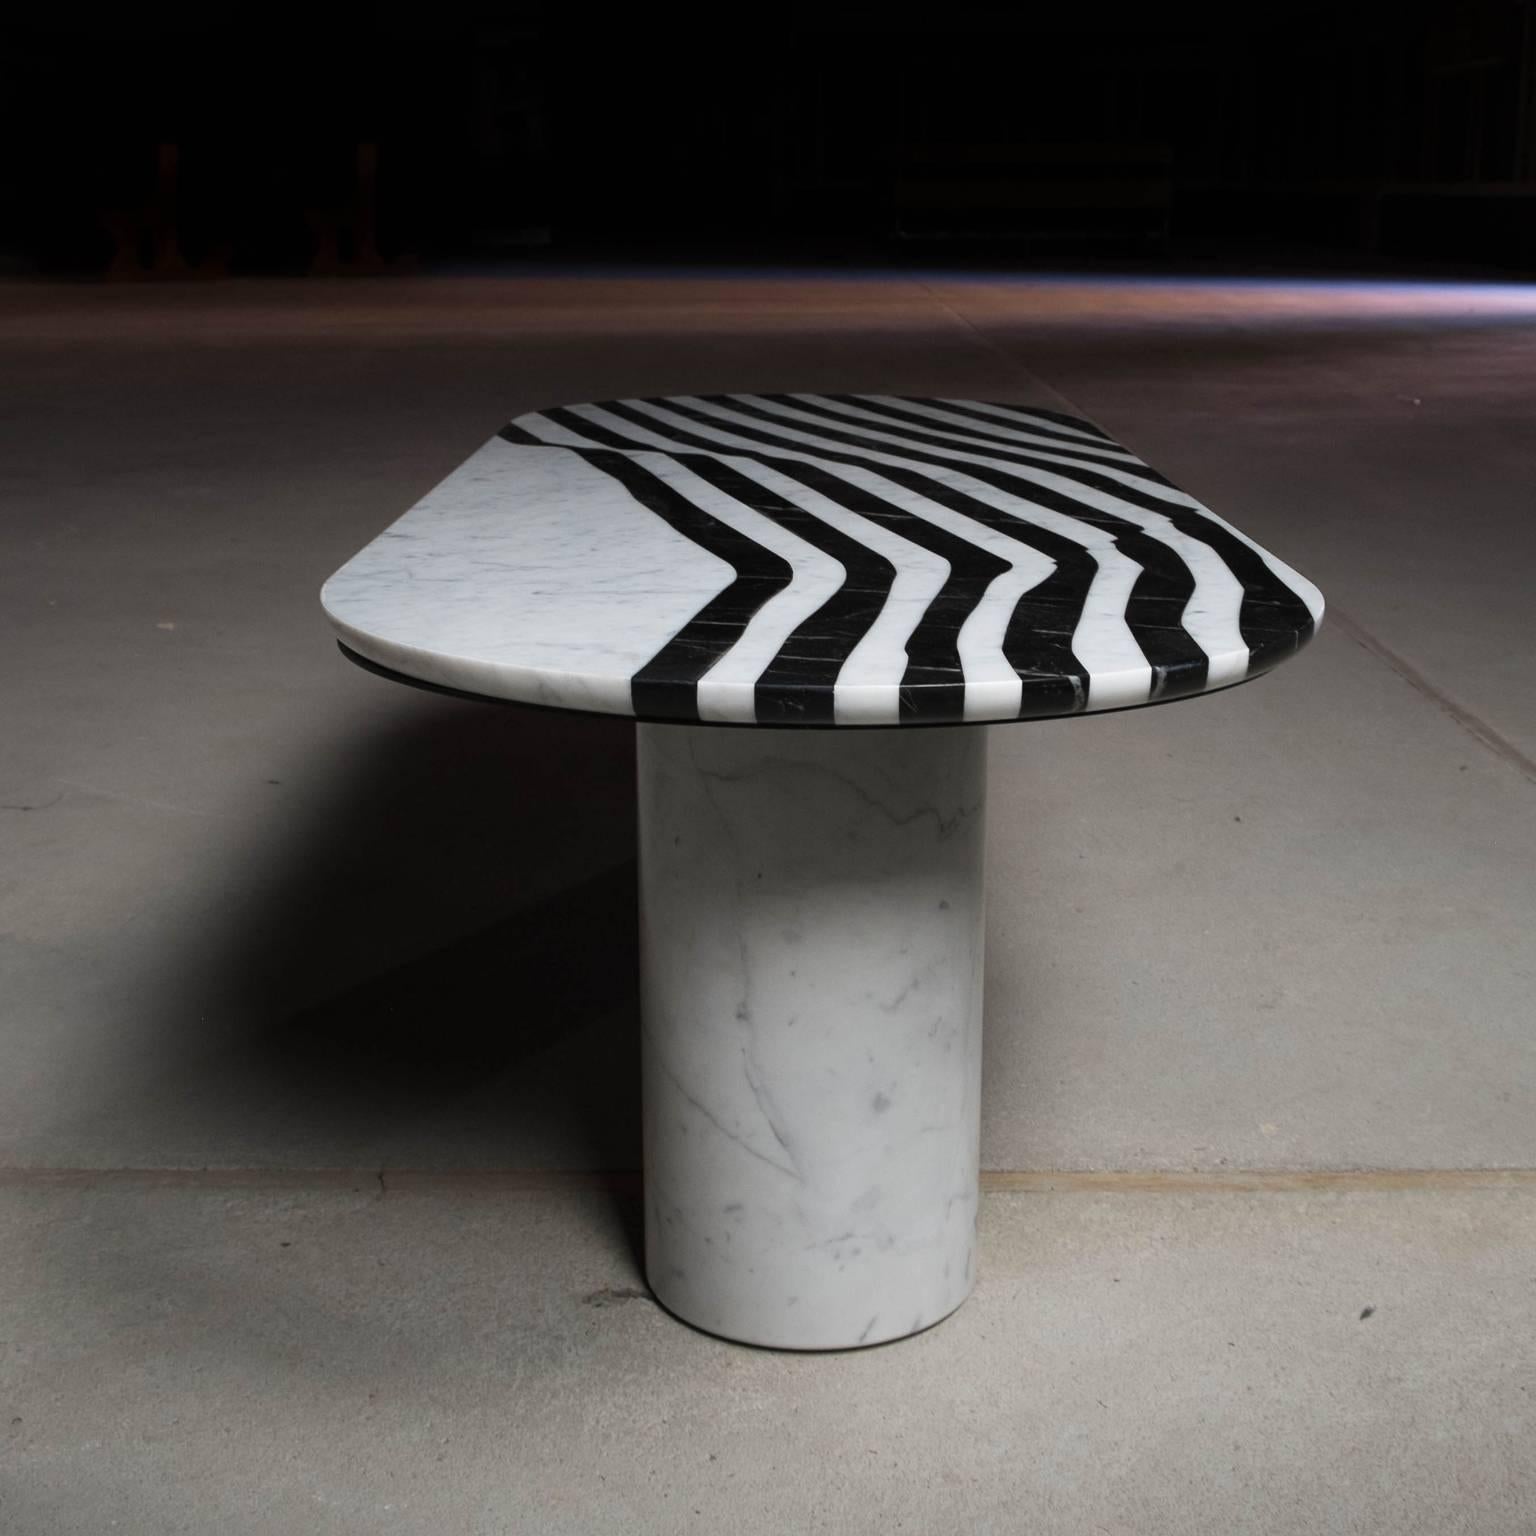 Veiled Side Table Oval, Contemporary Inlaid Black and White Marble In New Condition For Sale In London, GB